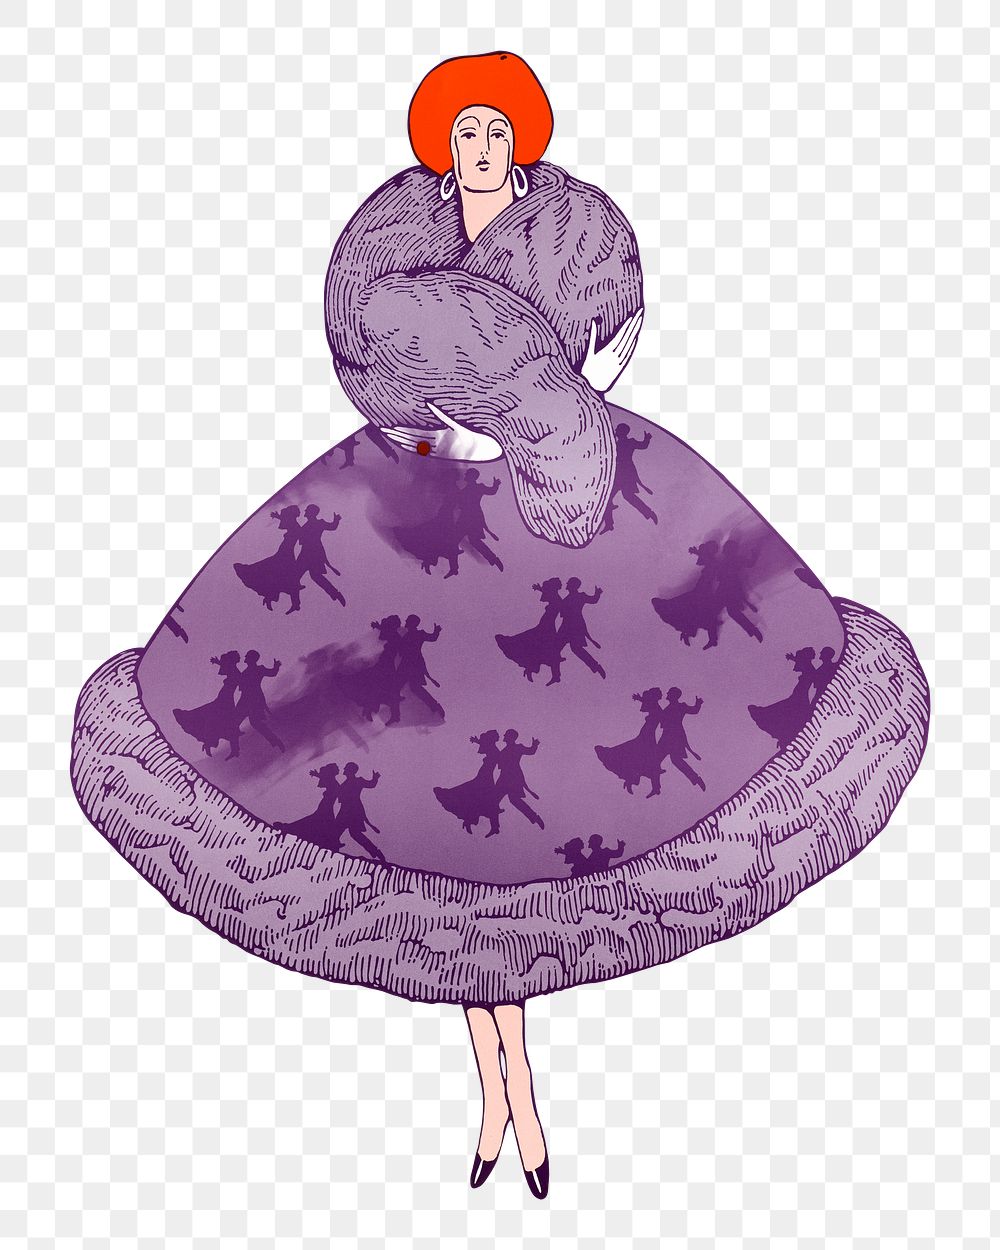 Vintage woman png purple ball gown dress sticker, transparent background.  Remixed by rawpixel.